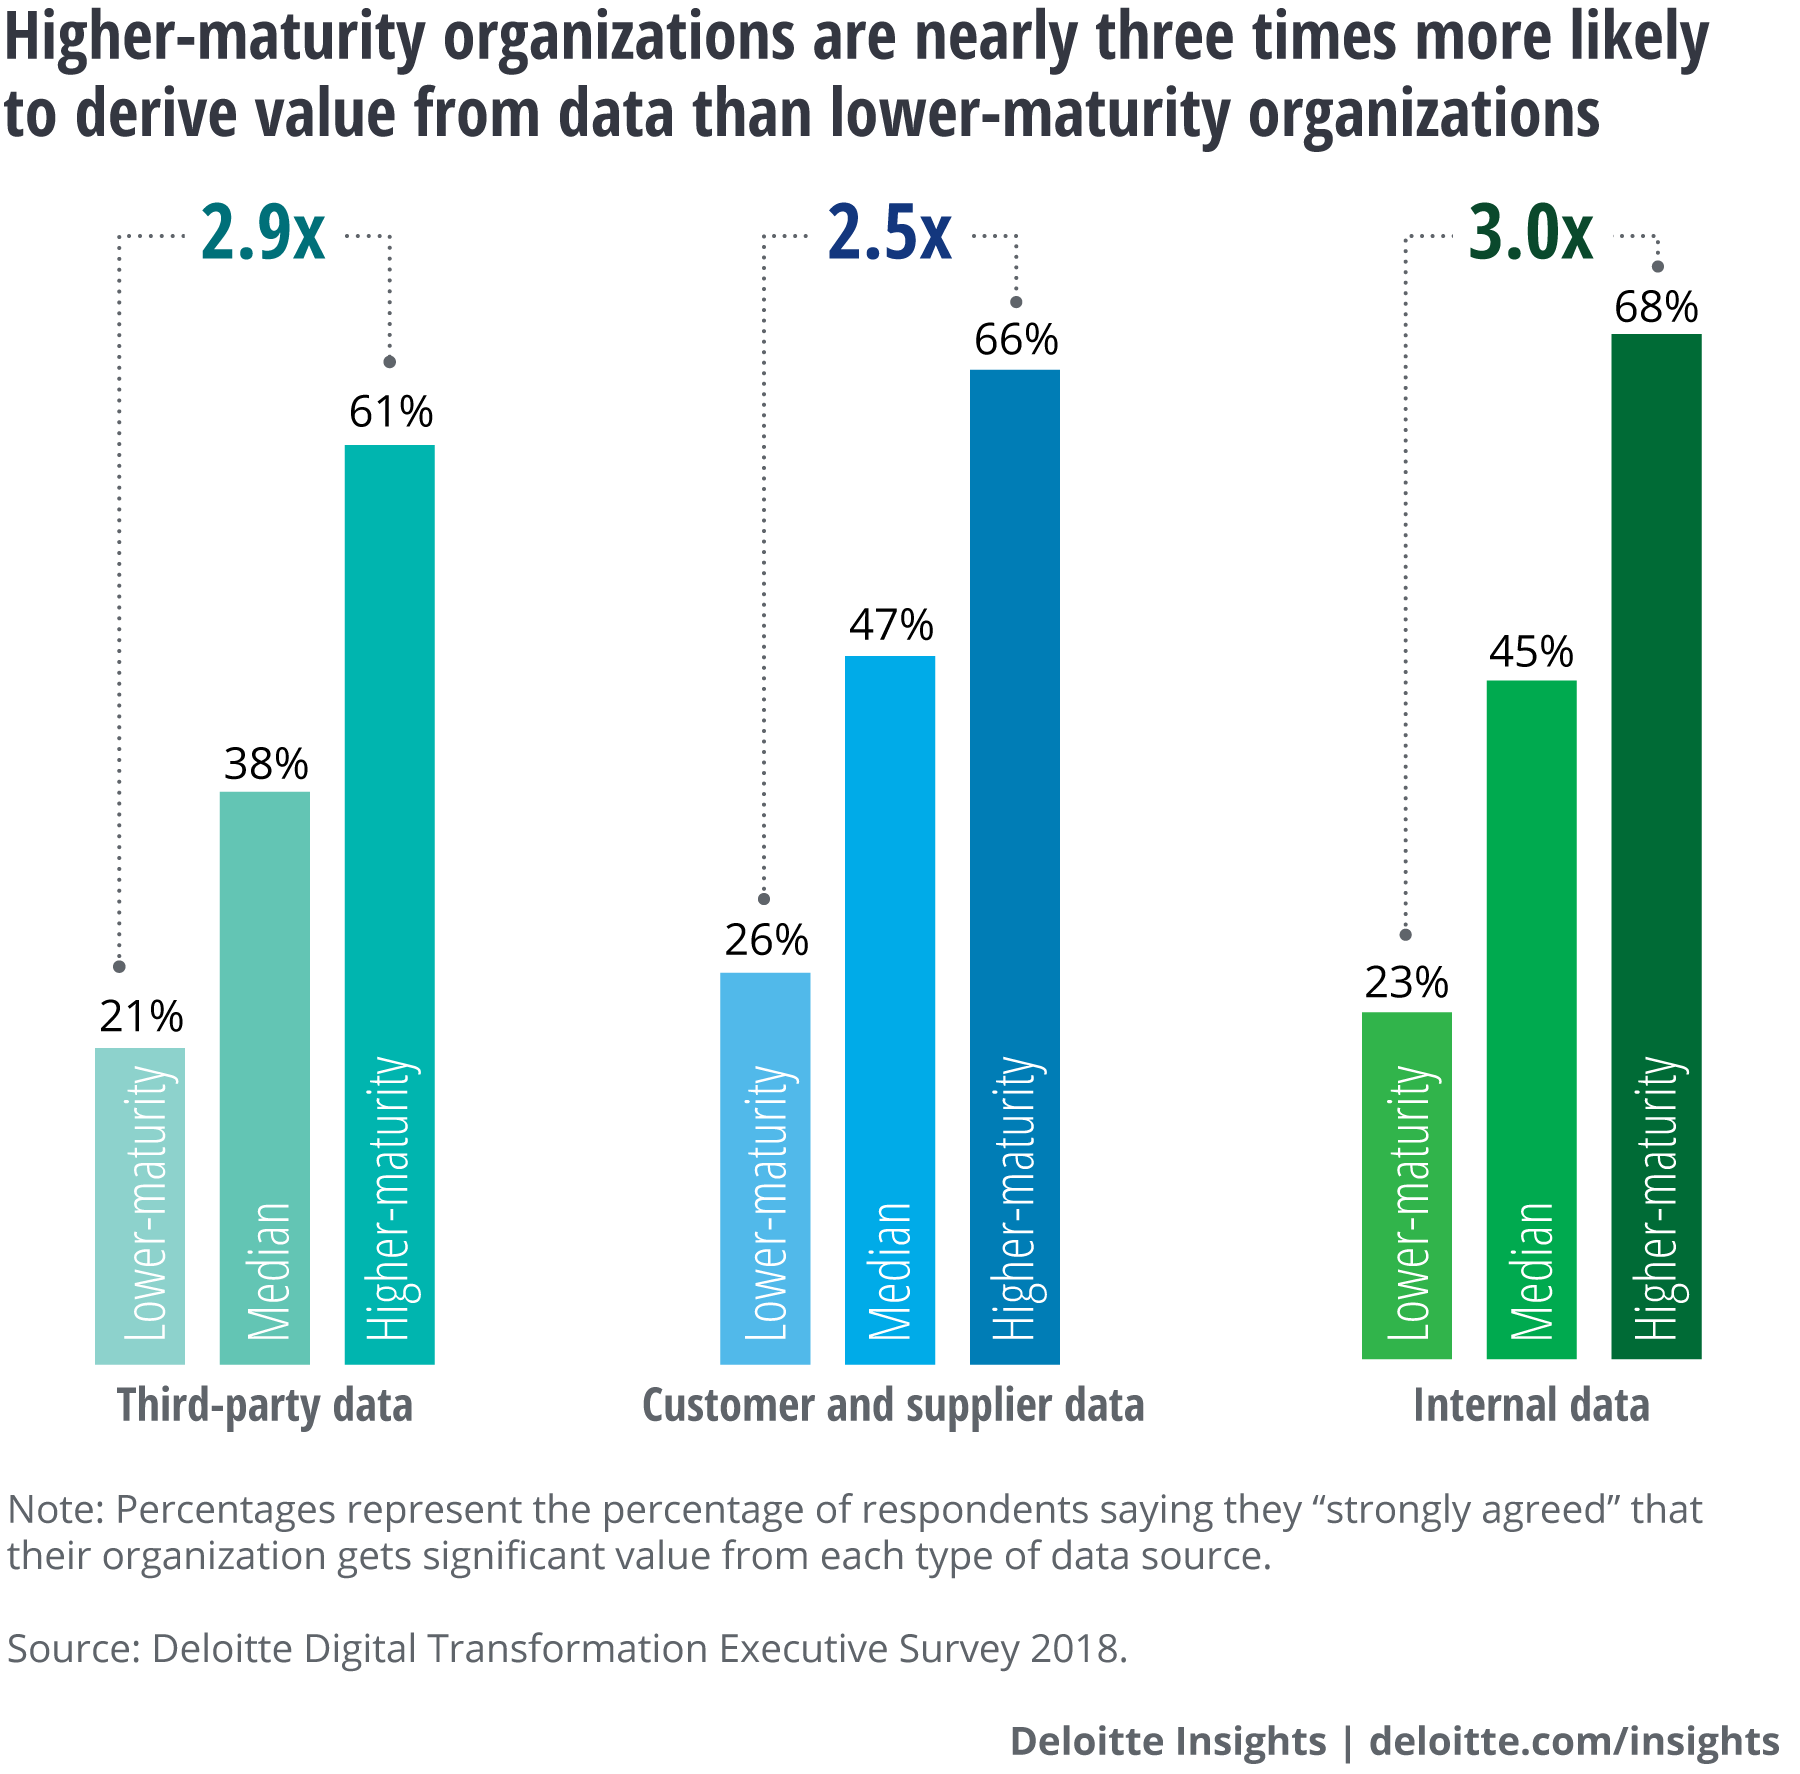 Higher-maturity organizations are nearly three times more likely to derive value from data than lower-maturity organizations